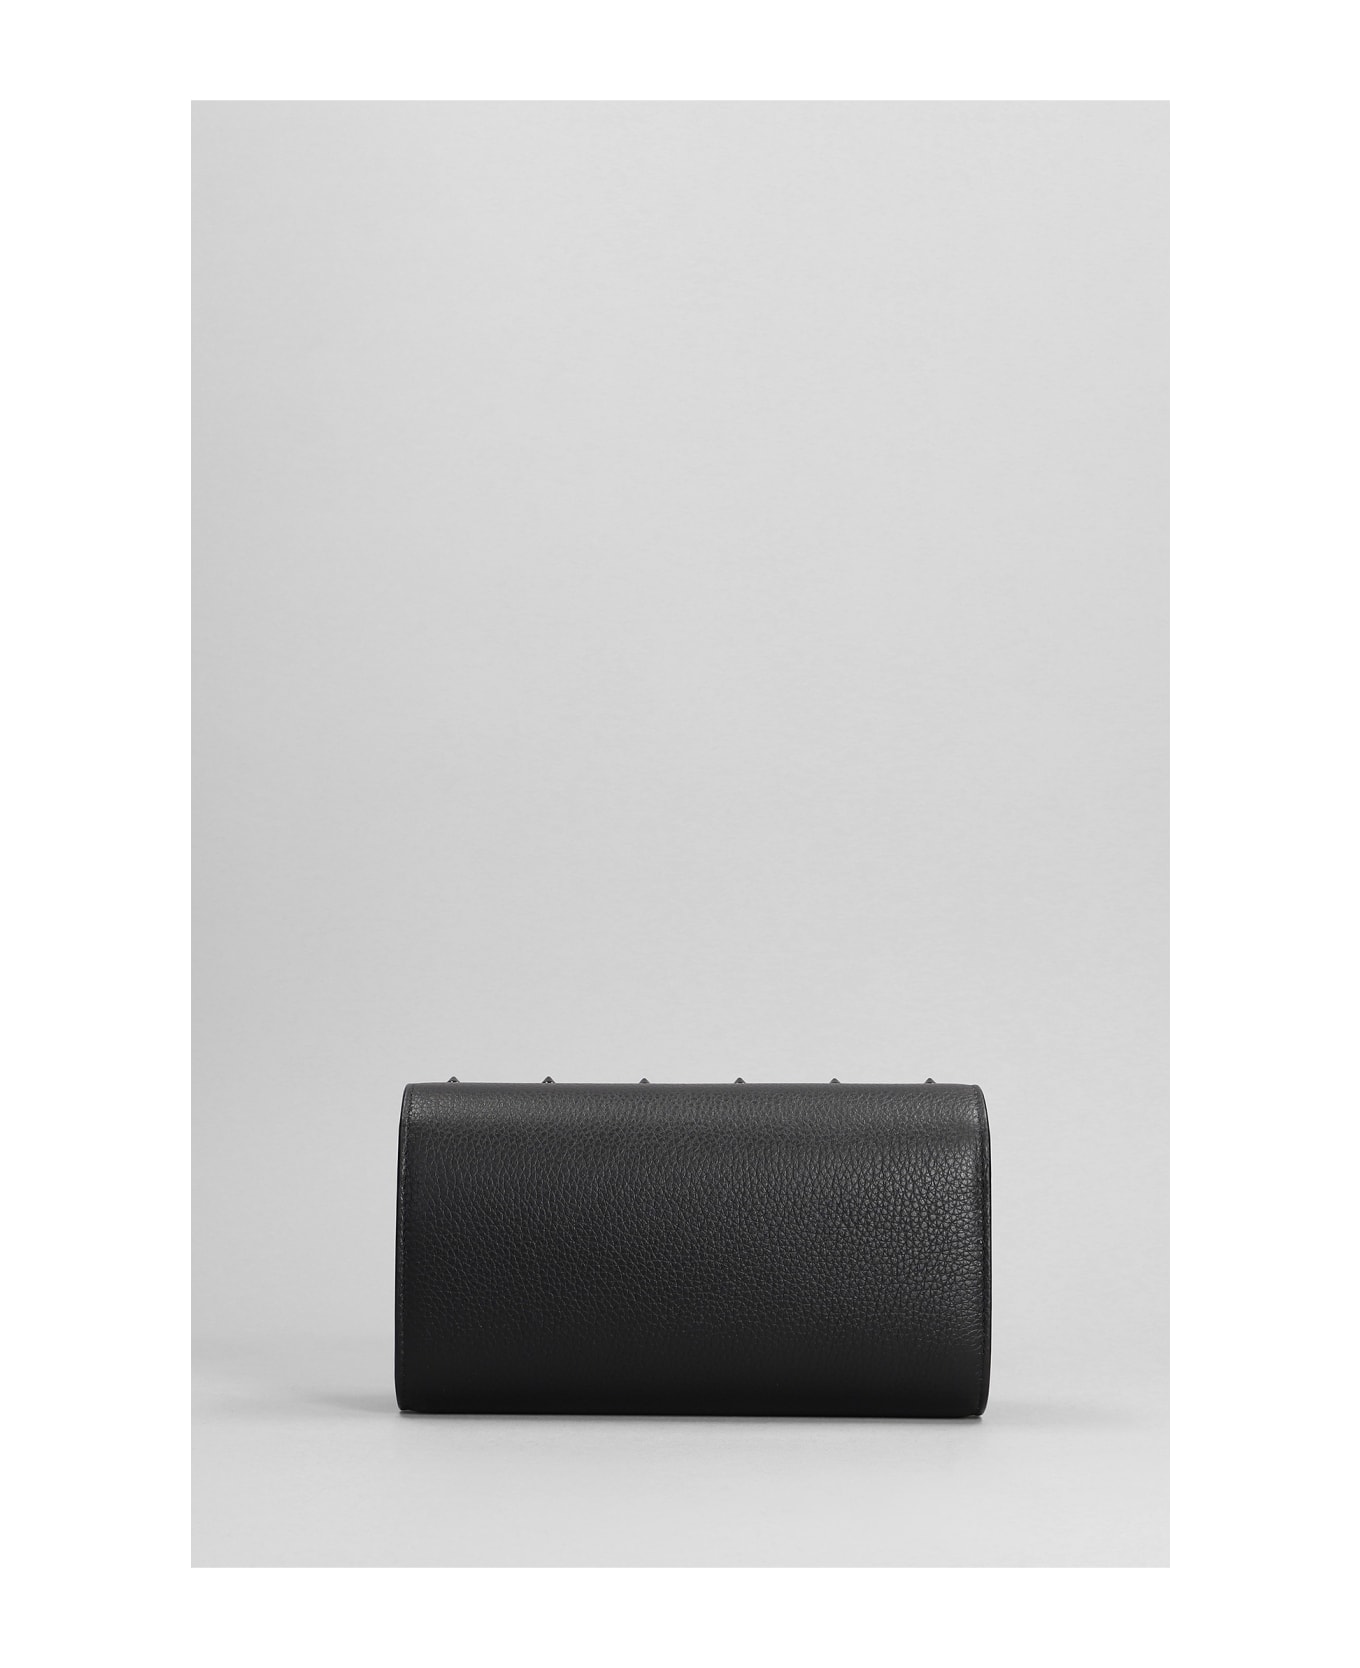 Christian Louboutin Paloma Clutch In Black Leather - Black